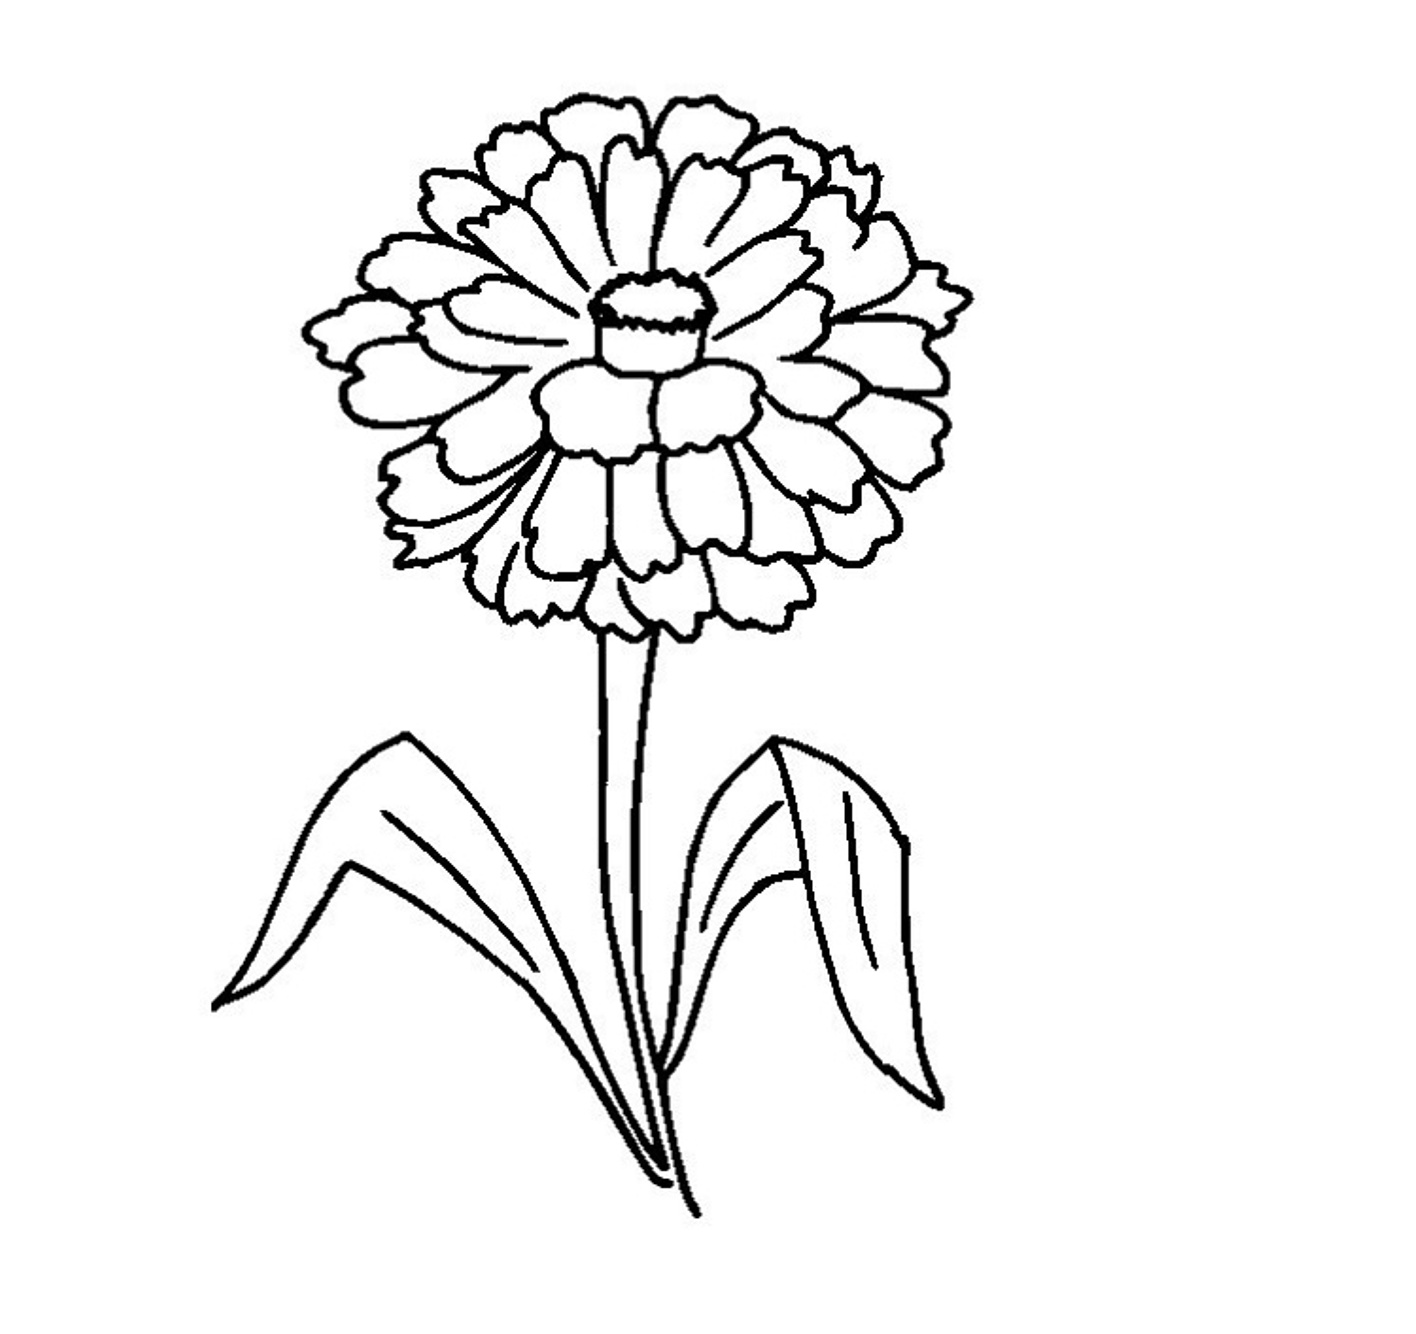 Zinnia Flower Coloring Pages   Coloring Cool